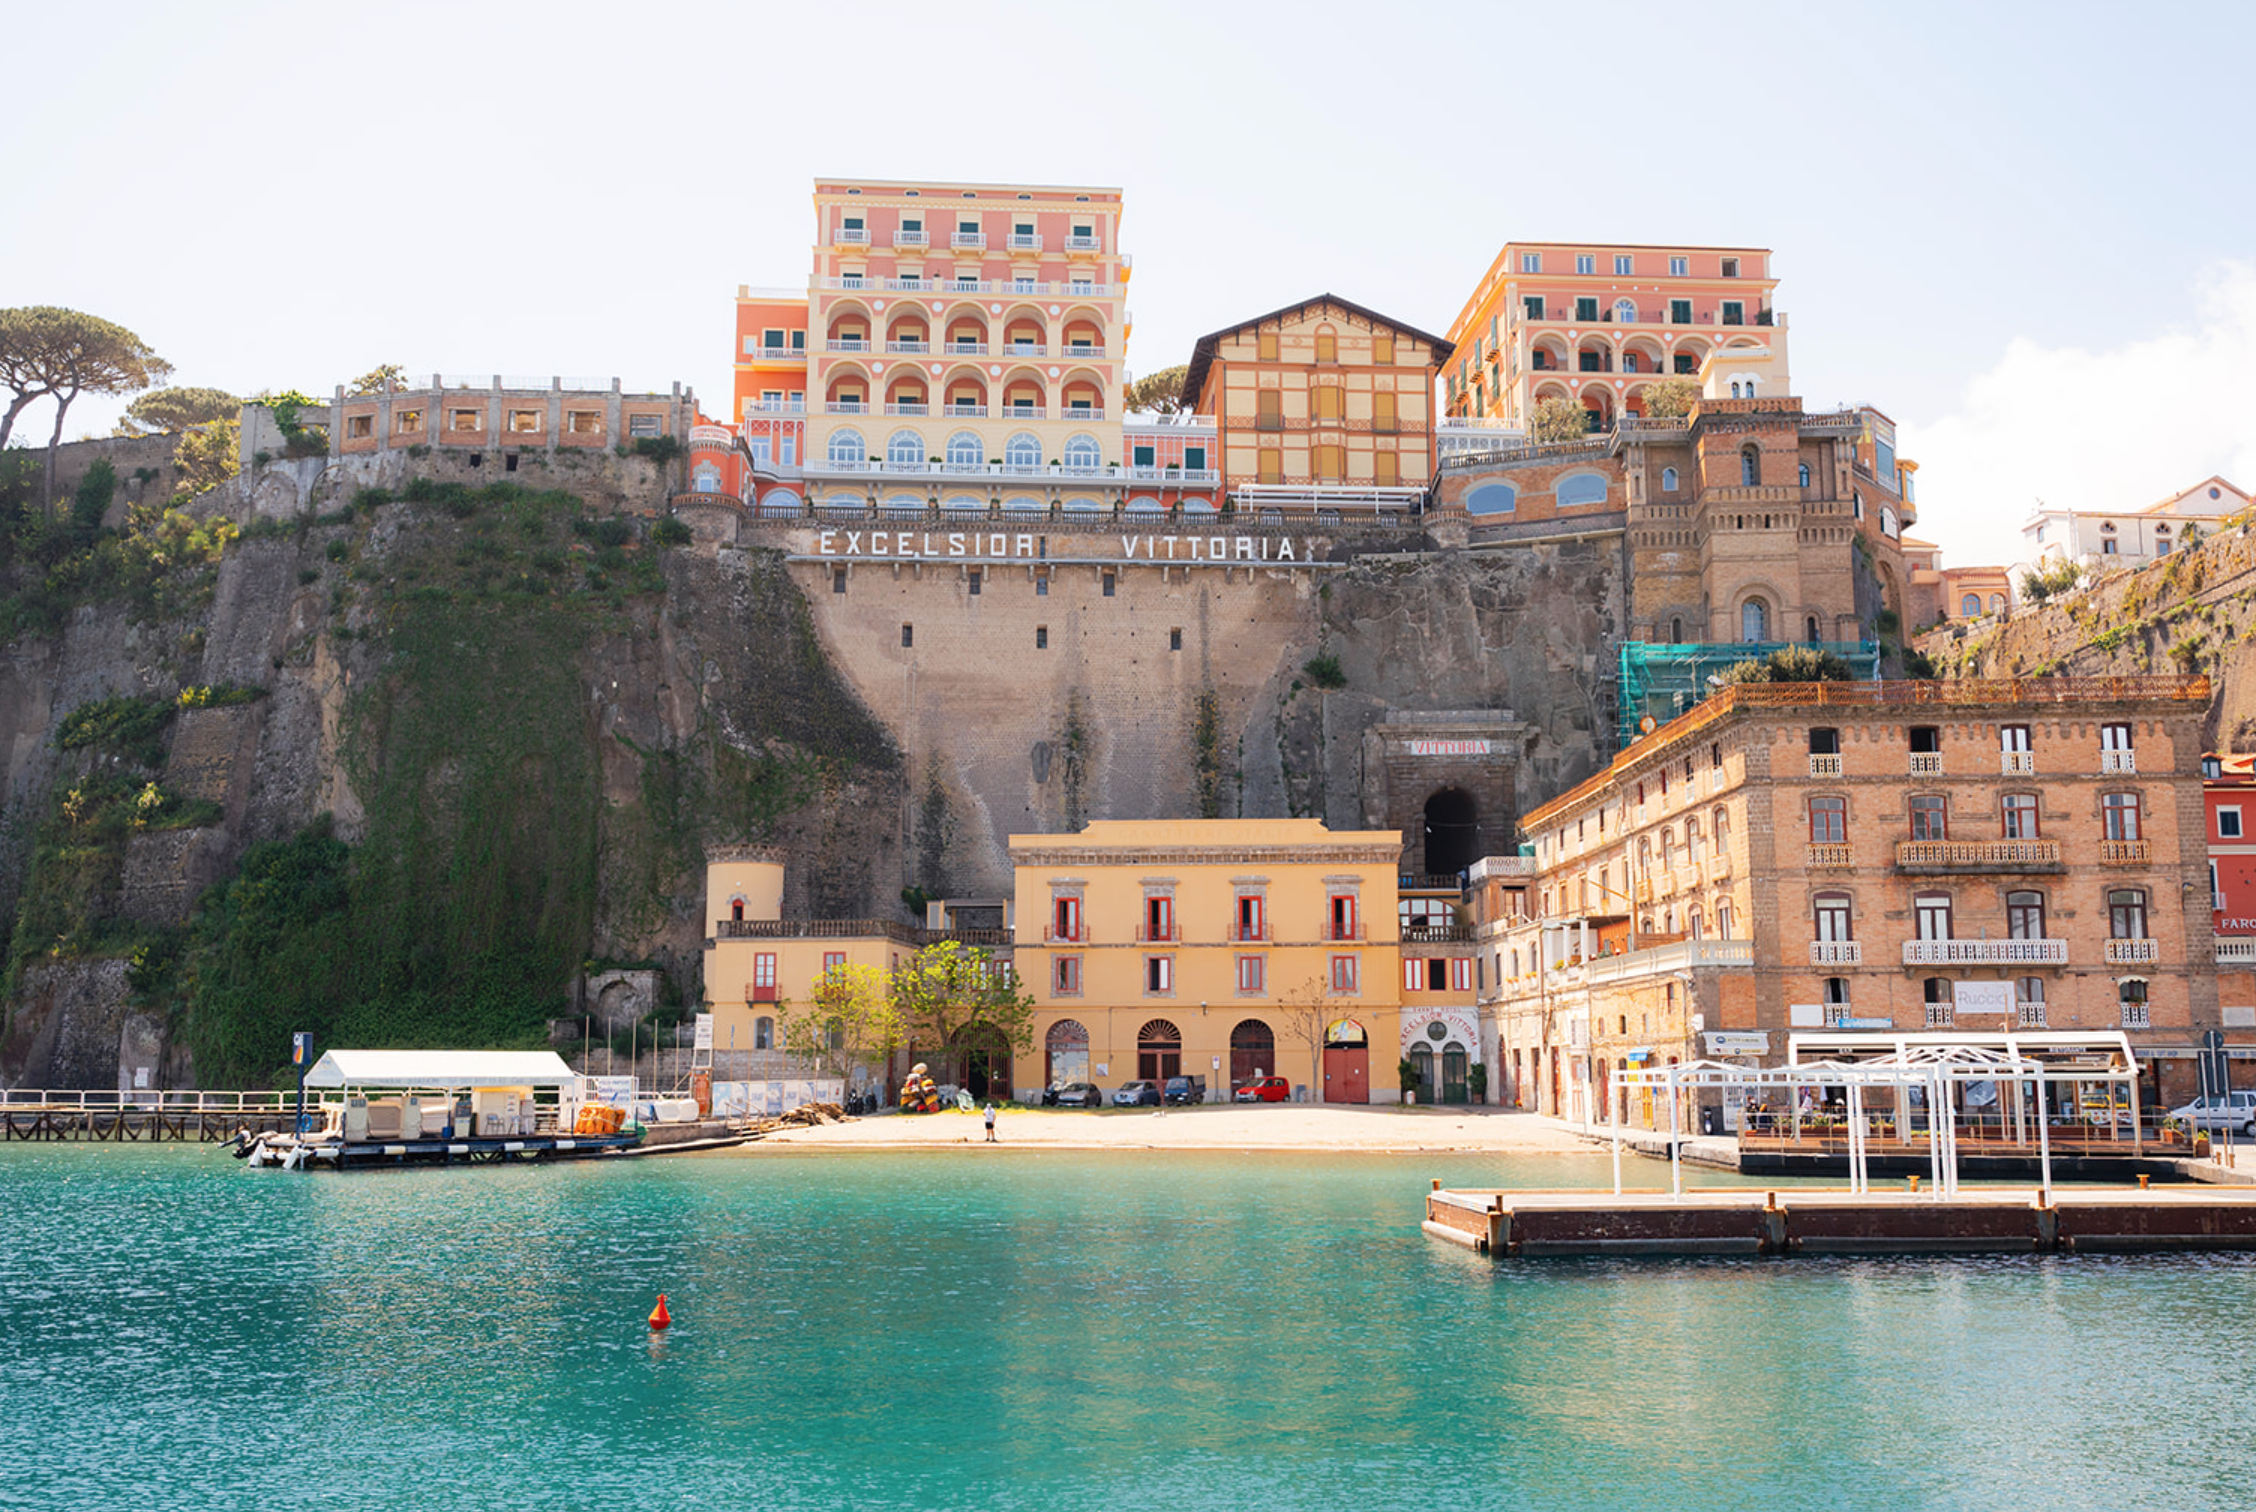 A shoreline on the Amalfi Coast with bright colored buildings and turquoise waters.